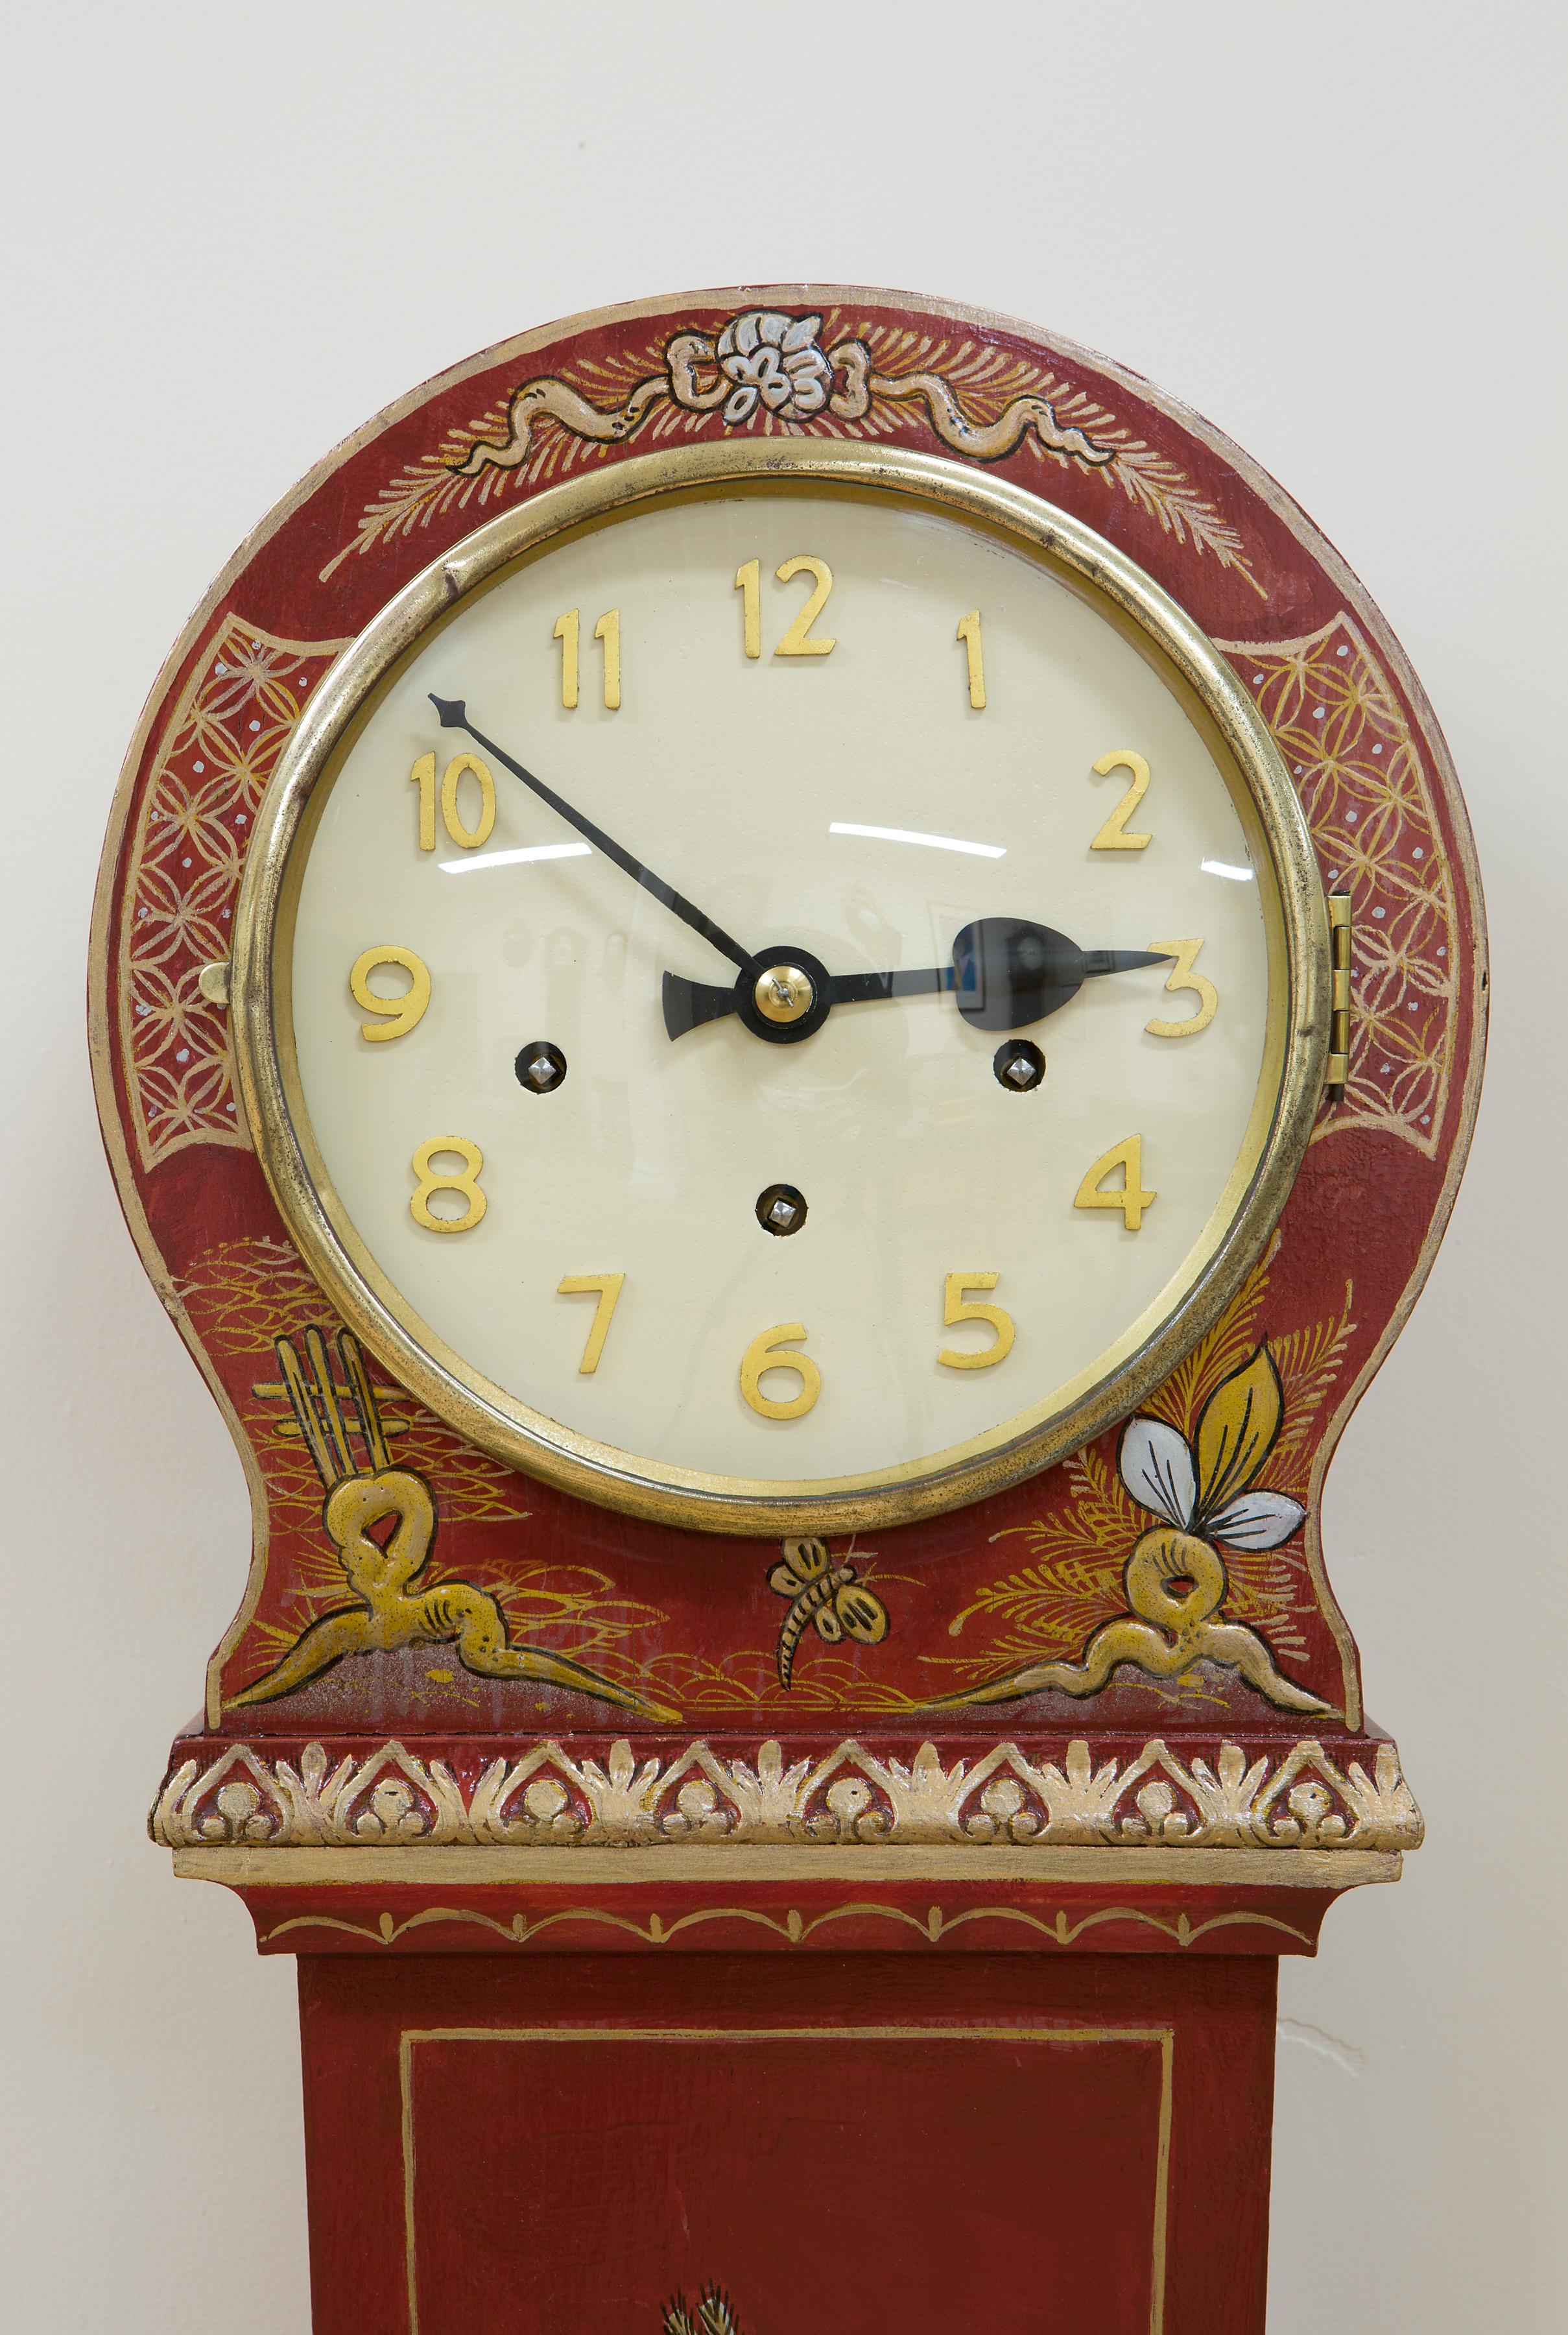 Art Deco grandmother clock in a tapered case with Chinoiserie decoration on a red ground.

Painted dial with raised Arabic numerals.

Eight day Westminster quarter chiming movement, circa 1925

 